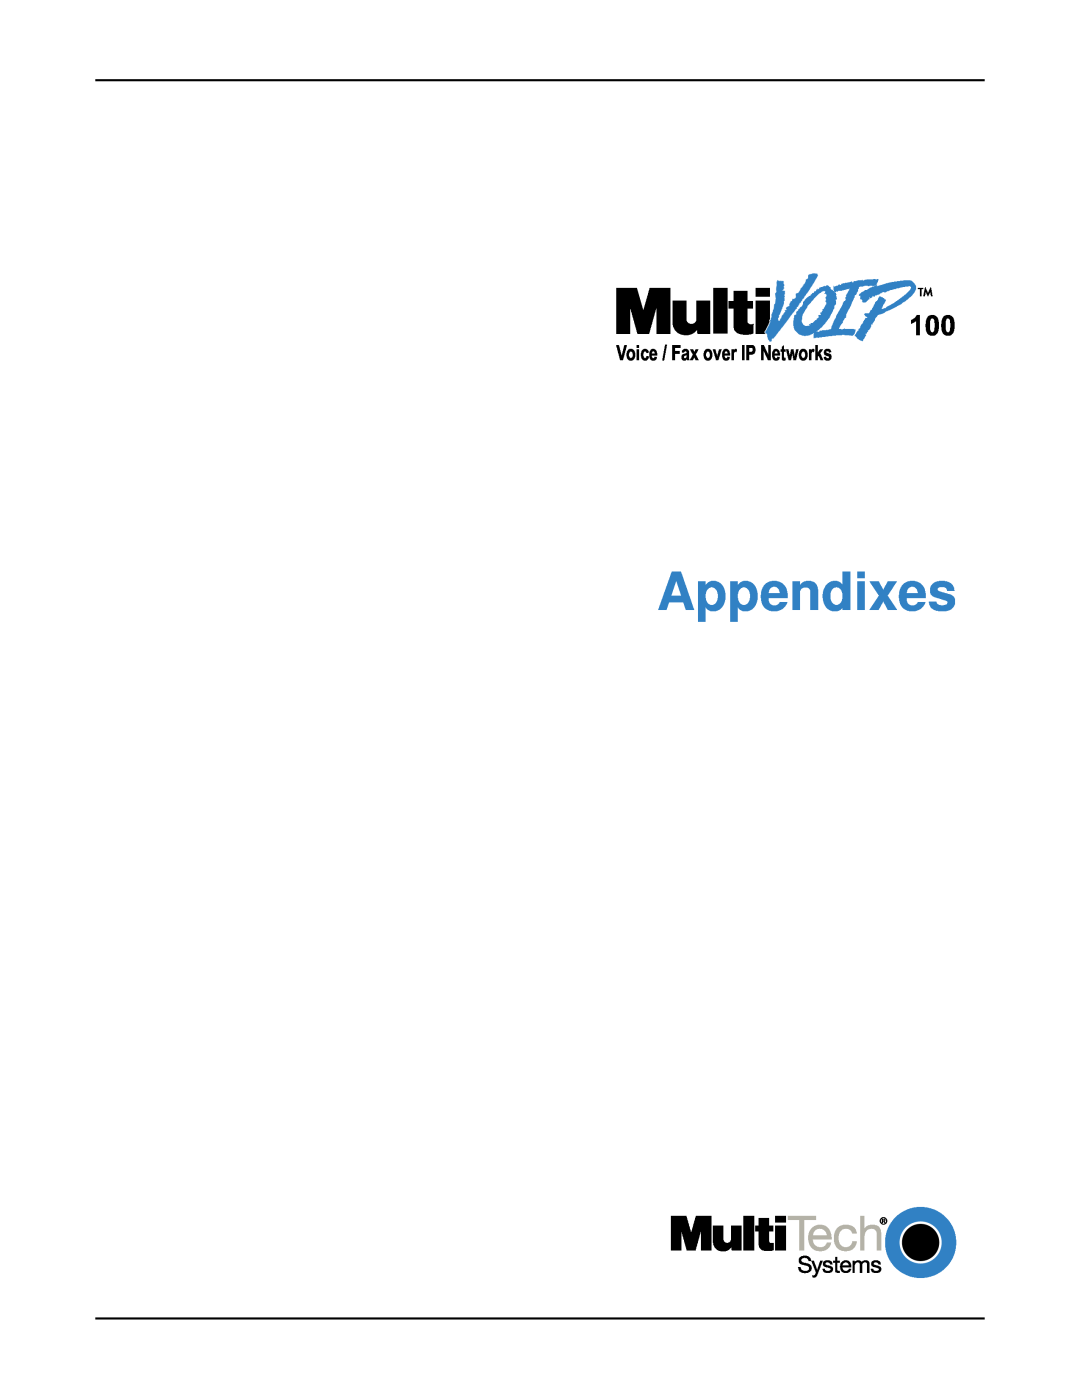 Multi-Tech Systems MVP120 manual Appendixes, Voice / Fax over IP Networks 